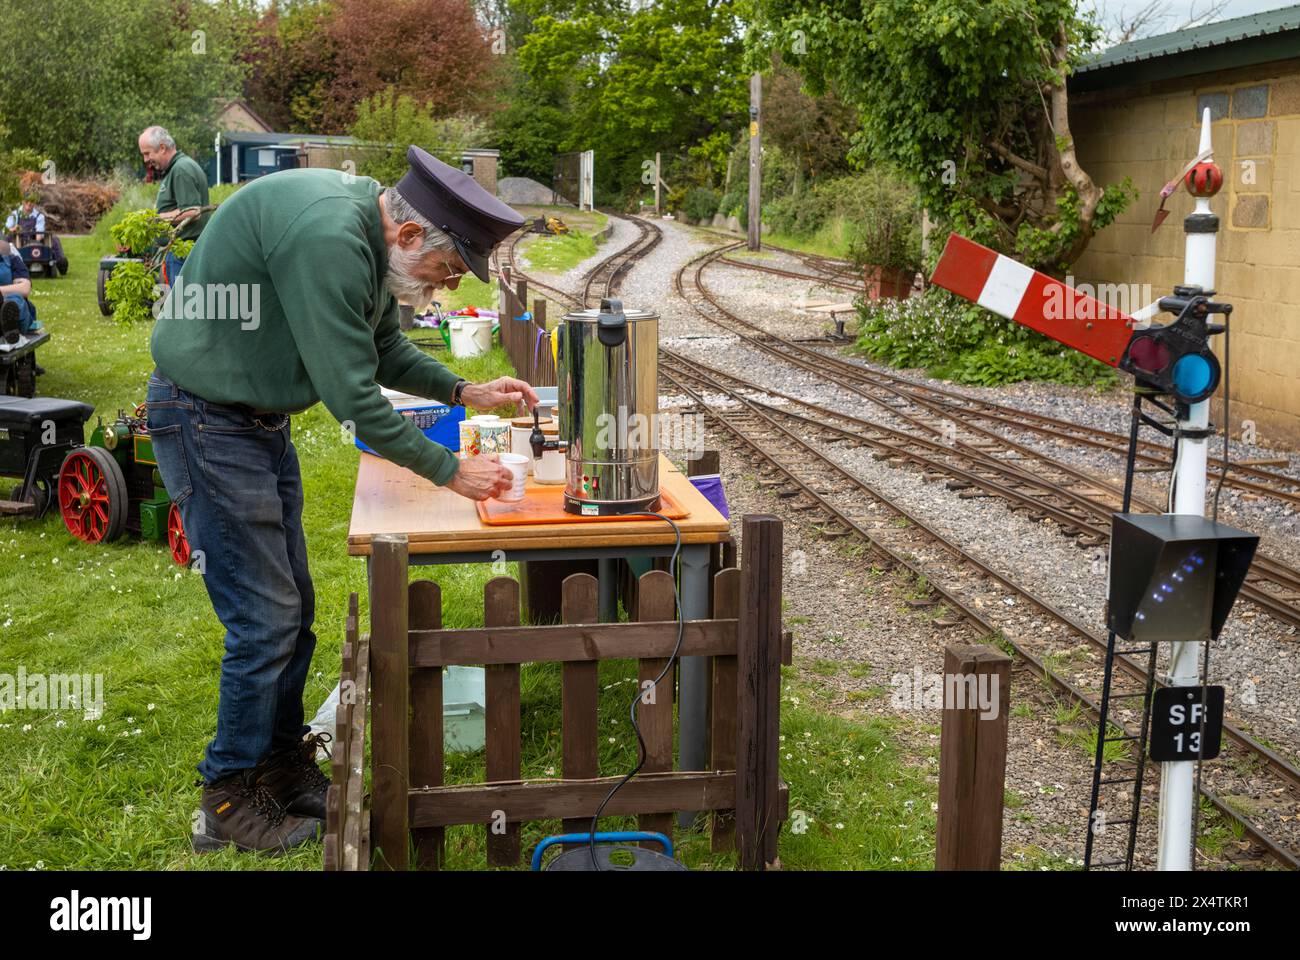 A volunteer makes a cup of tea from a hot water urn at South Downs Light Railway, Pulborough, UK Stock Photo